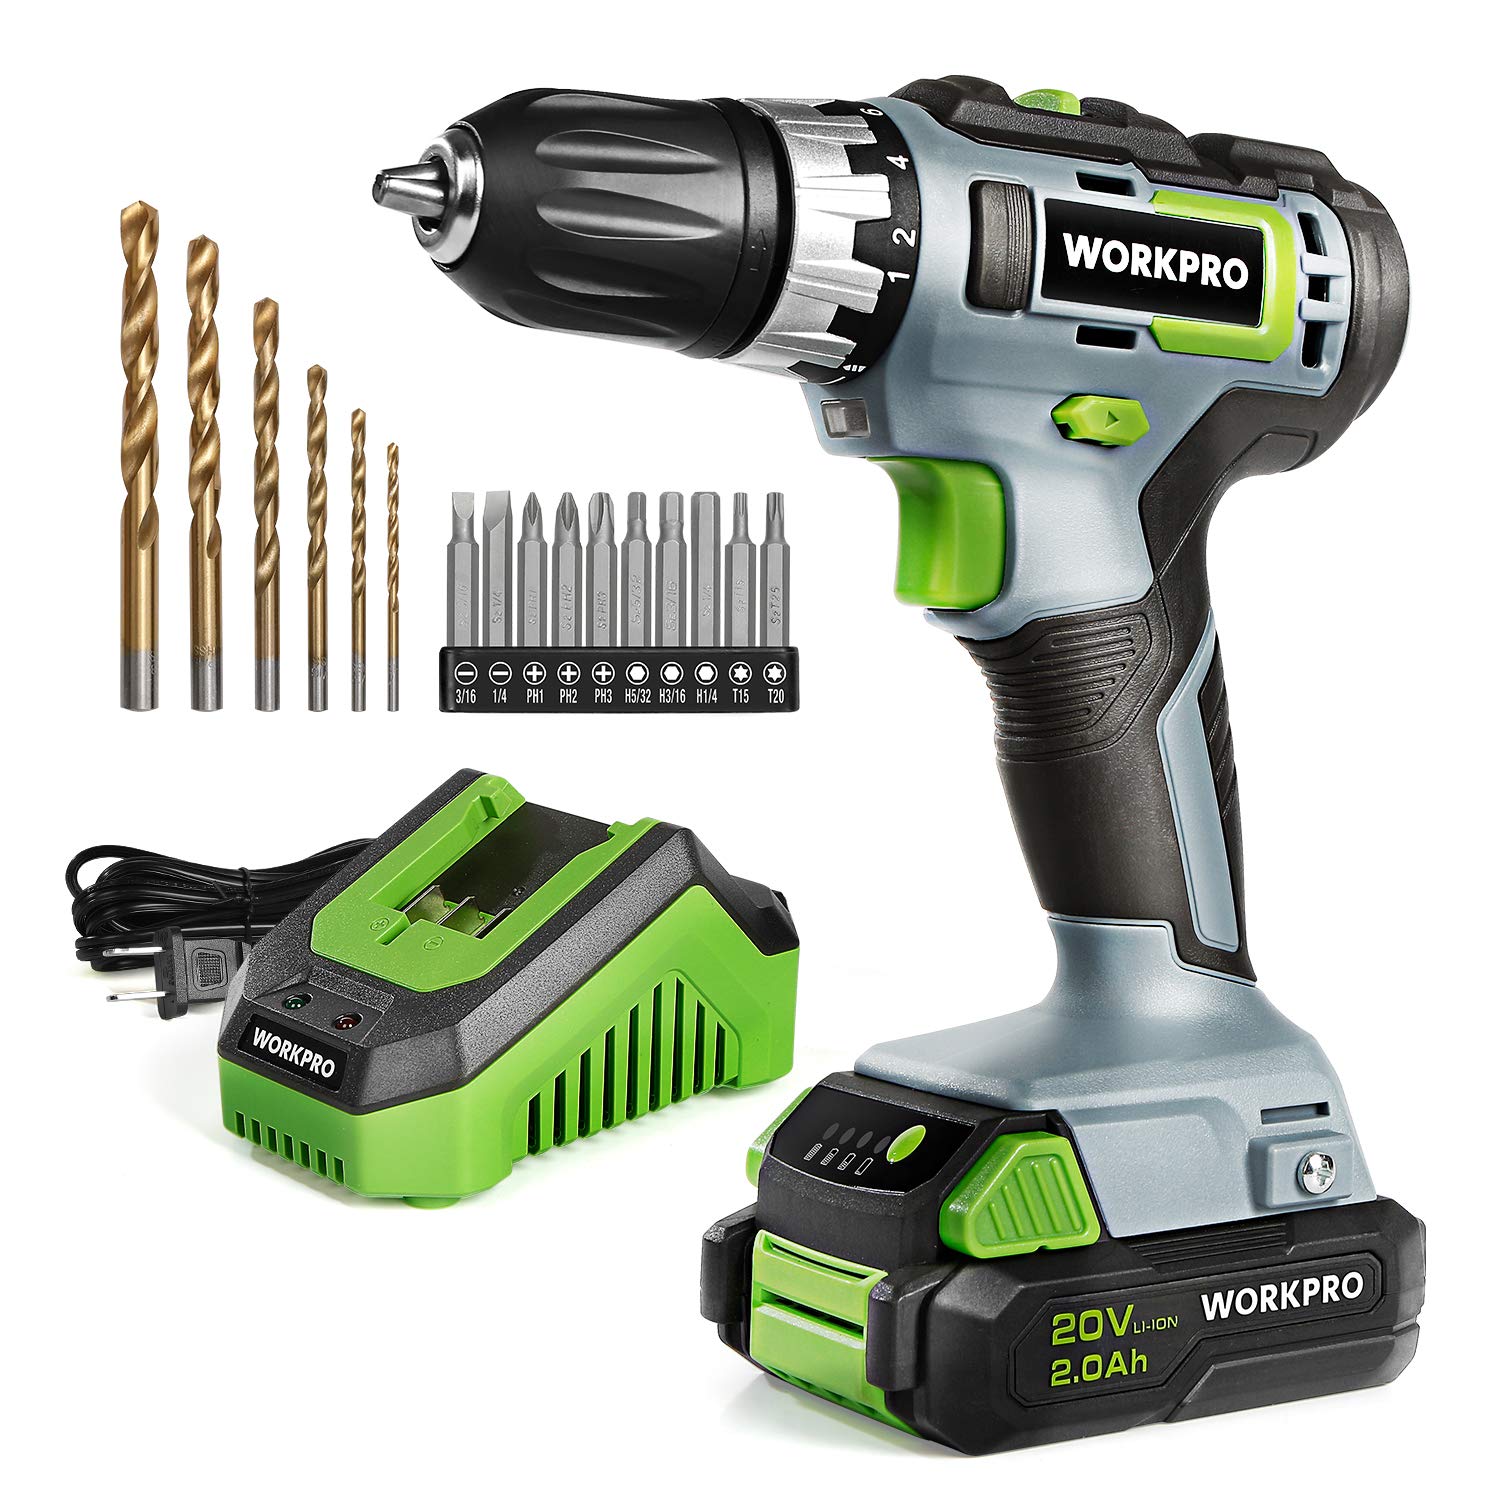 WORKPRO 20V Cordless DrillDriver Kit 38 182 Torque Setting Variable Speed 2.0 Ah Li-ion Battery and 1 Hour Fast Cha